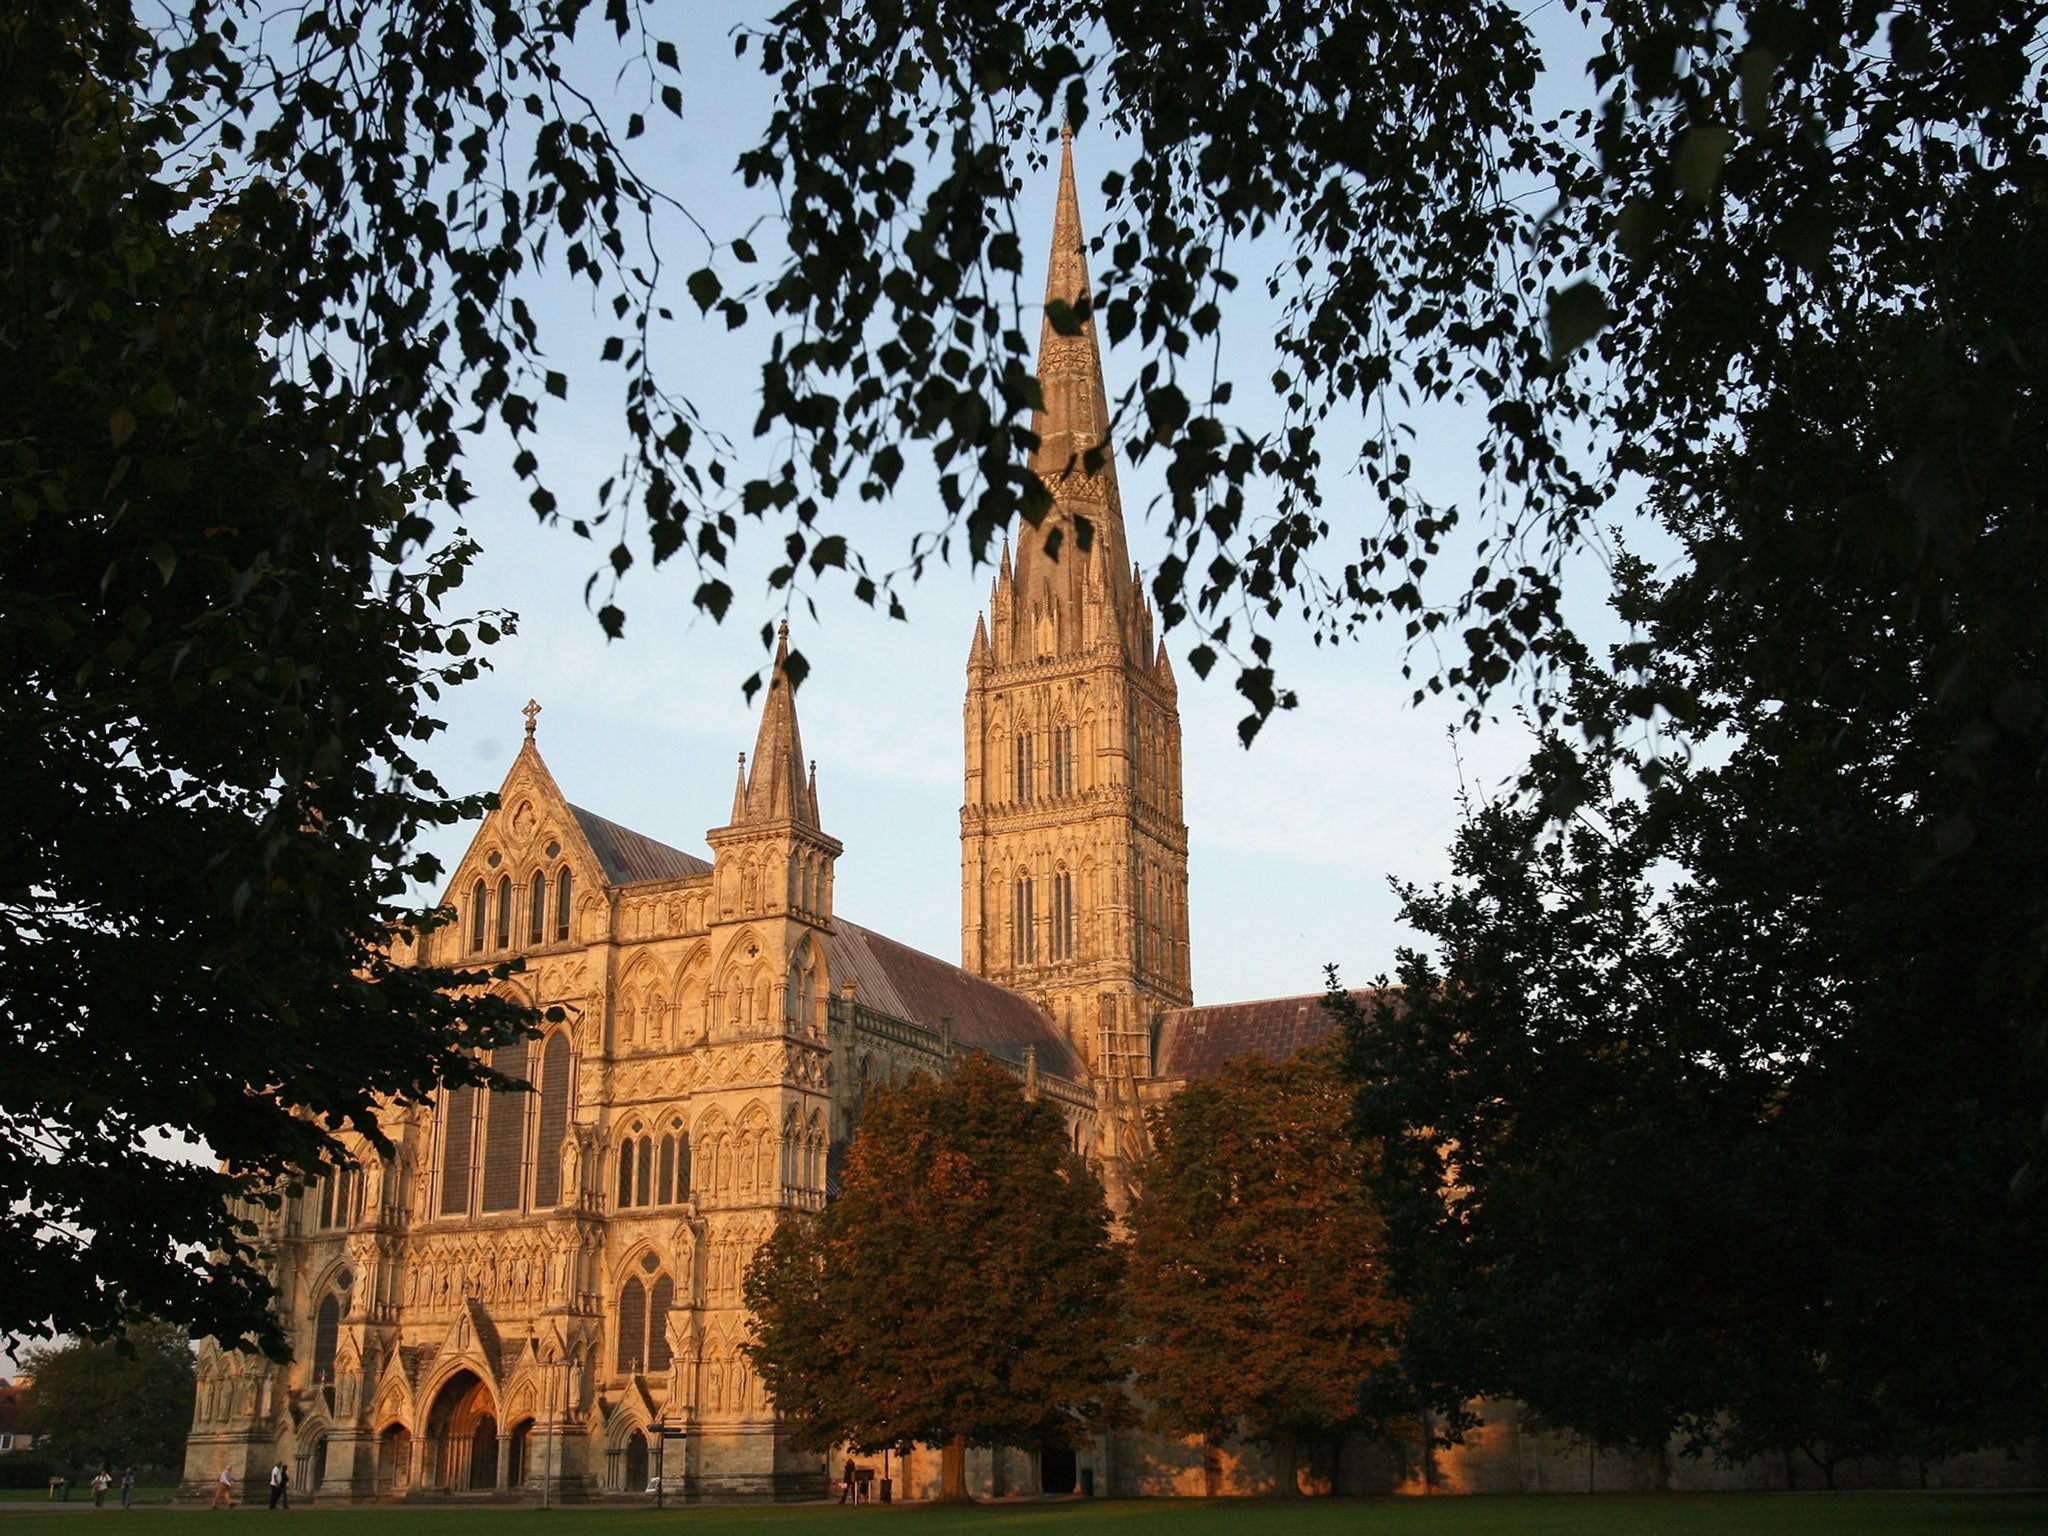 Salisbury Cathedral is home to one of the four surviving copies of the Magna Carta